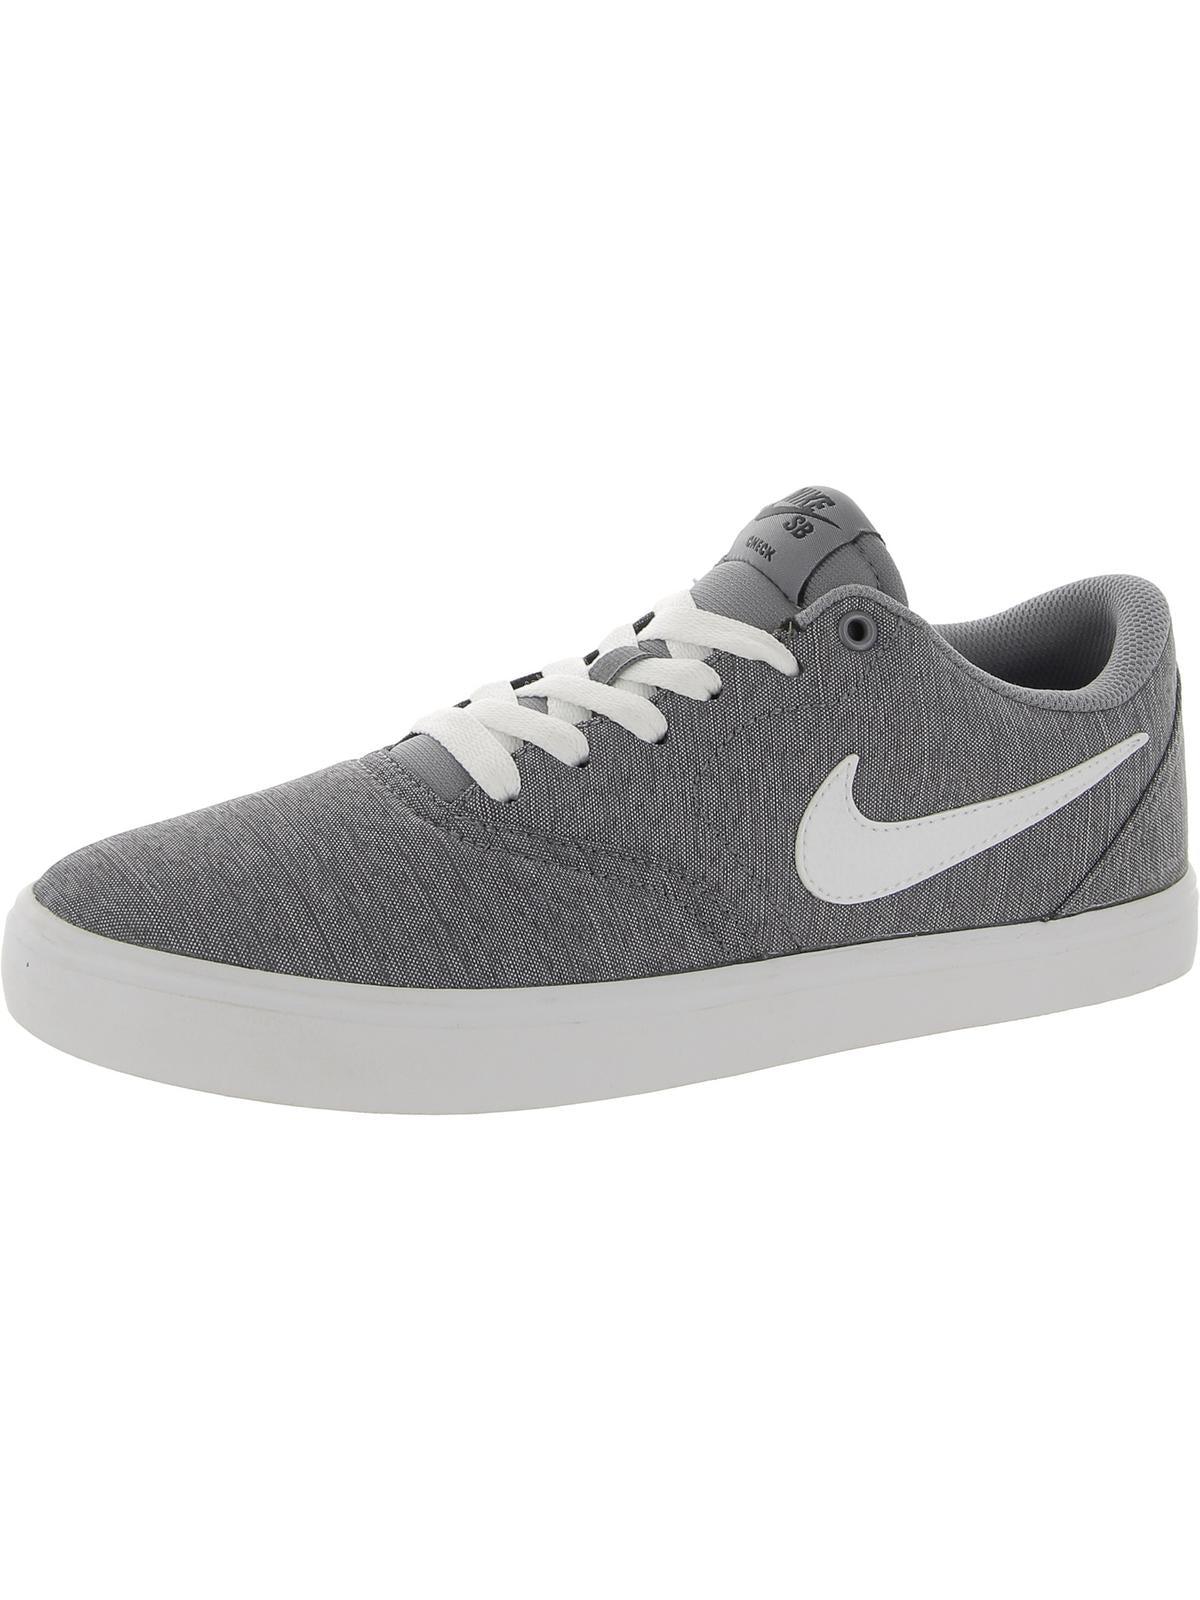 Nike Check Solar Cnvs Prm Canvas Printed Skate Shoes in Gray for Men | Lyst